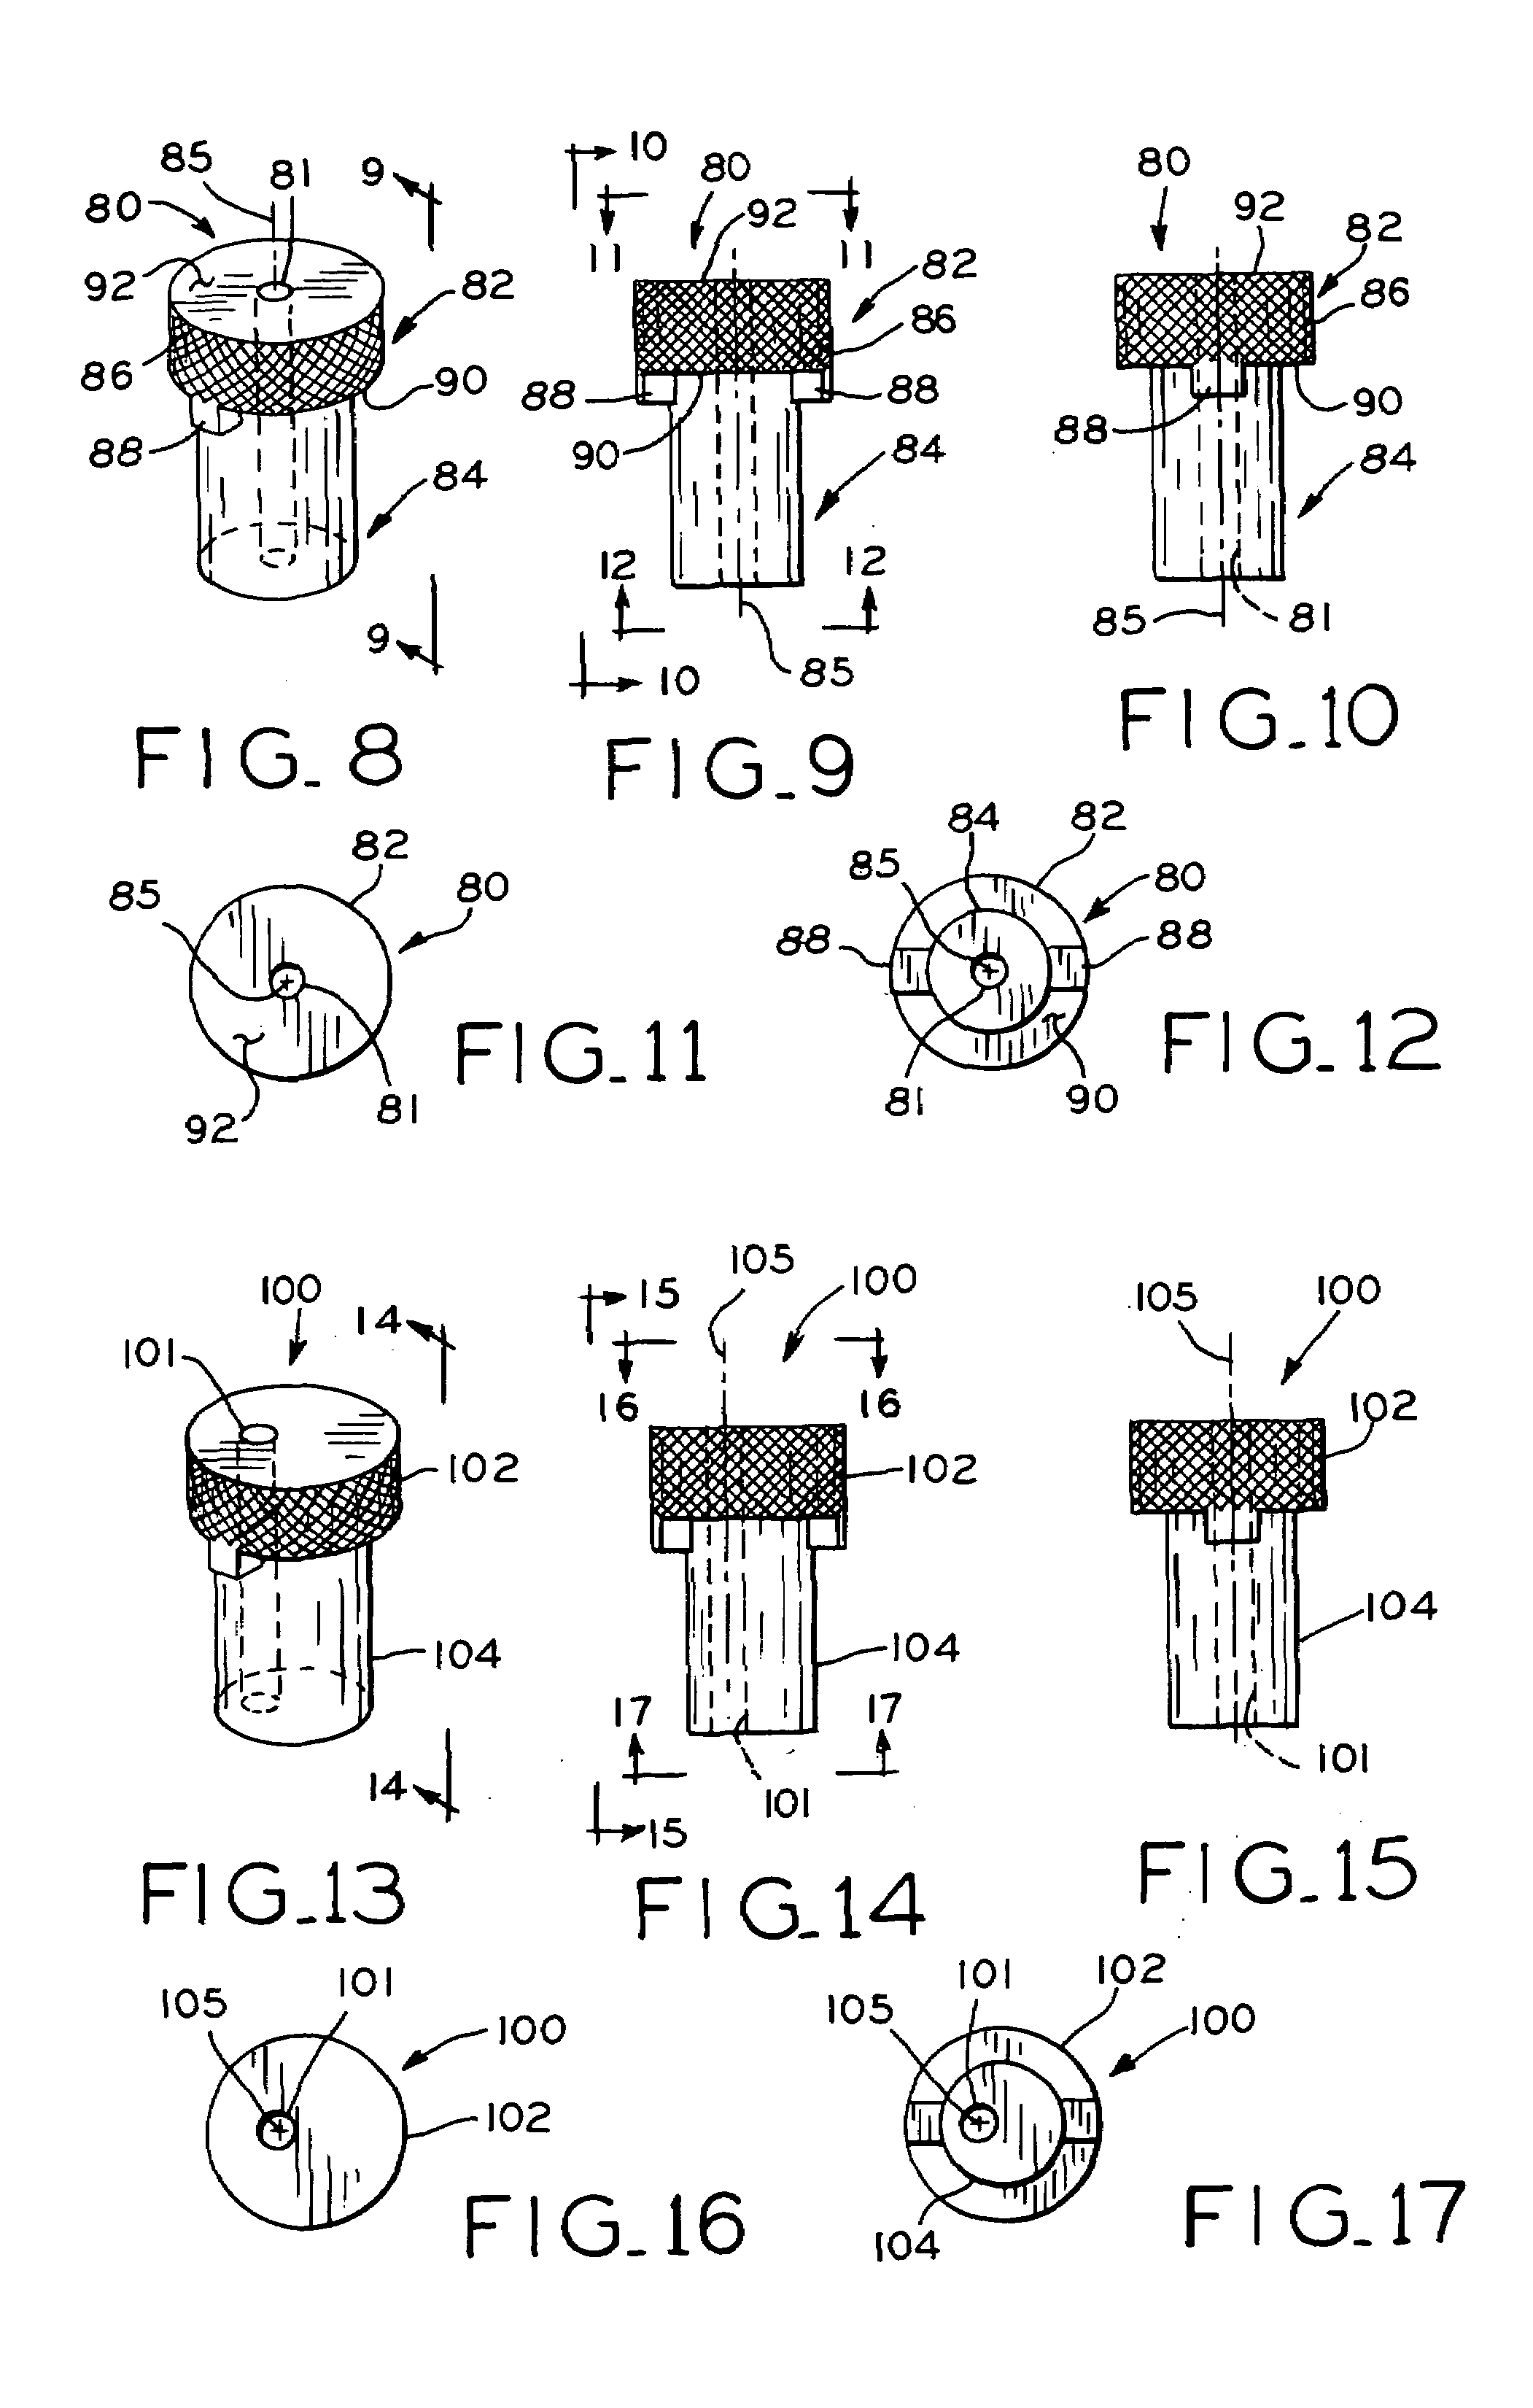 Method and apparatus for preparing a glenoid surface